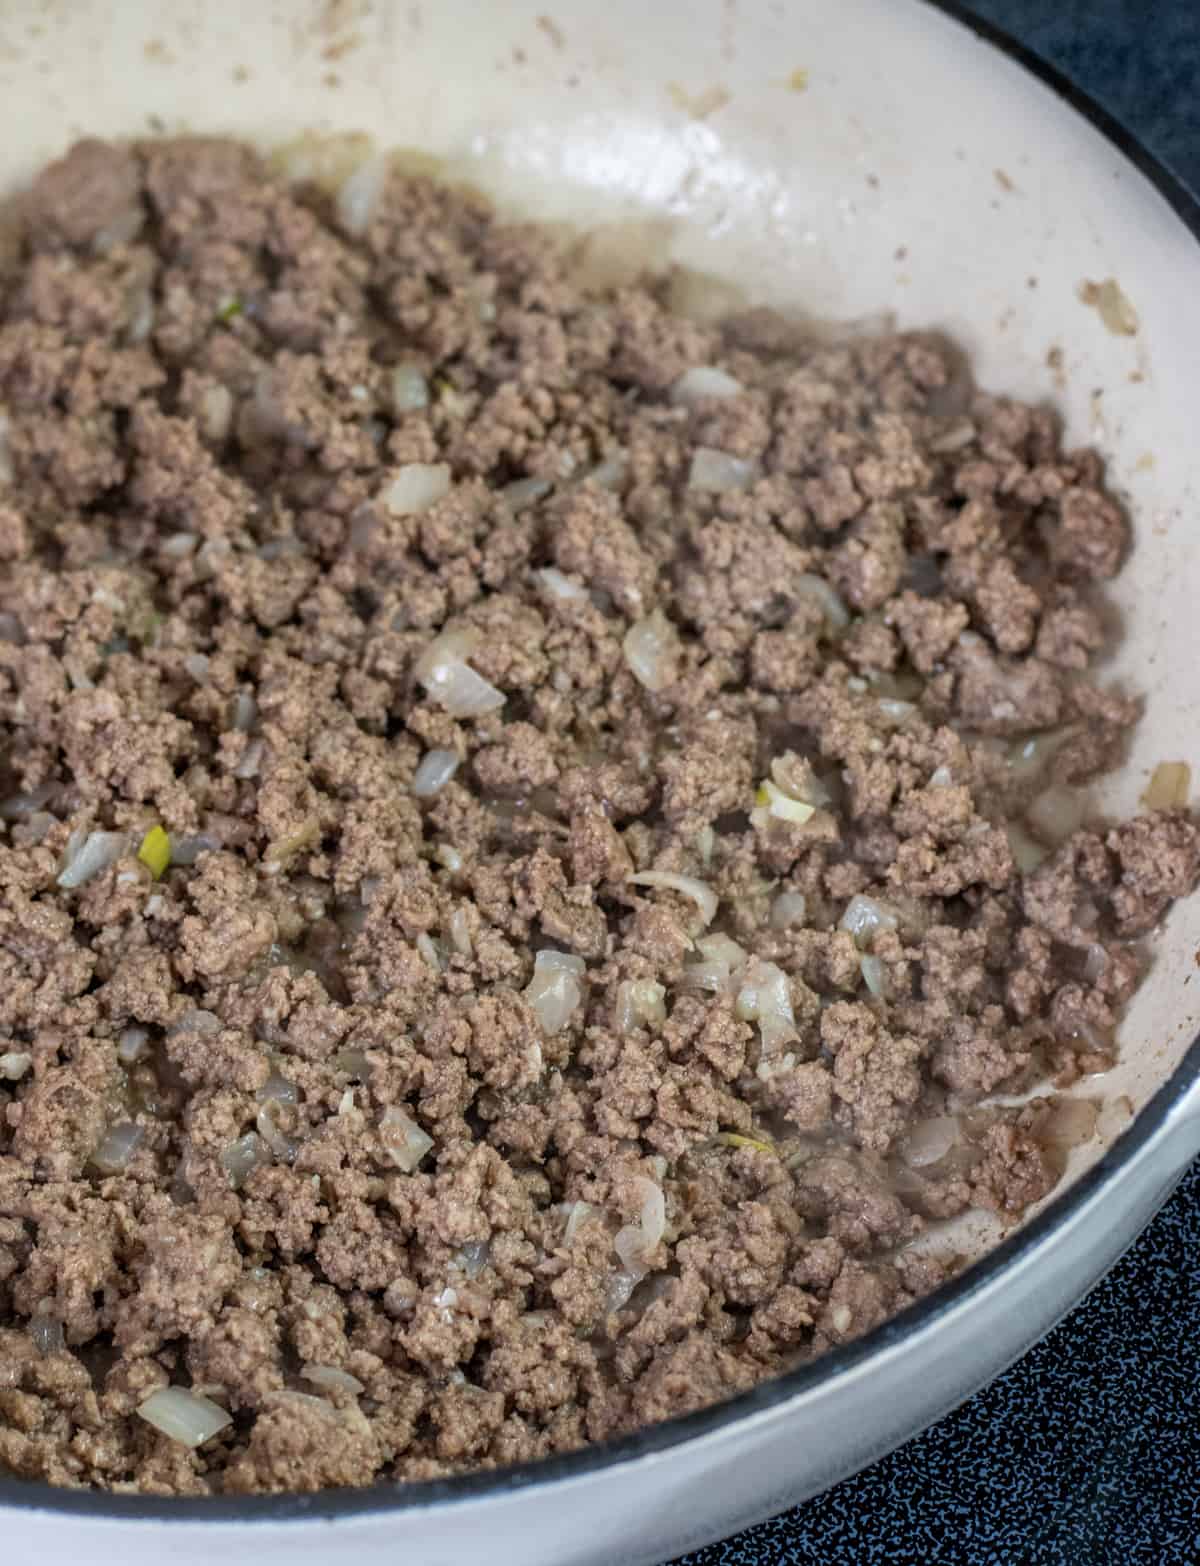 Cooked ground beef in a casserole dish.